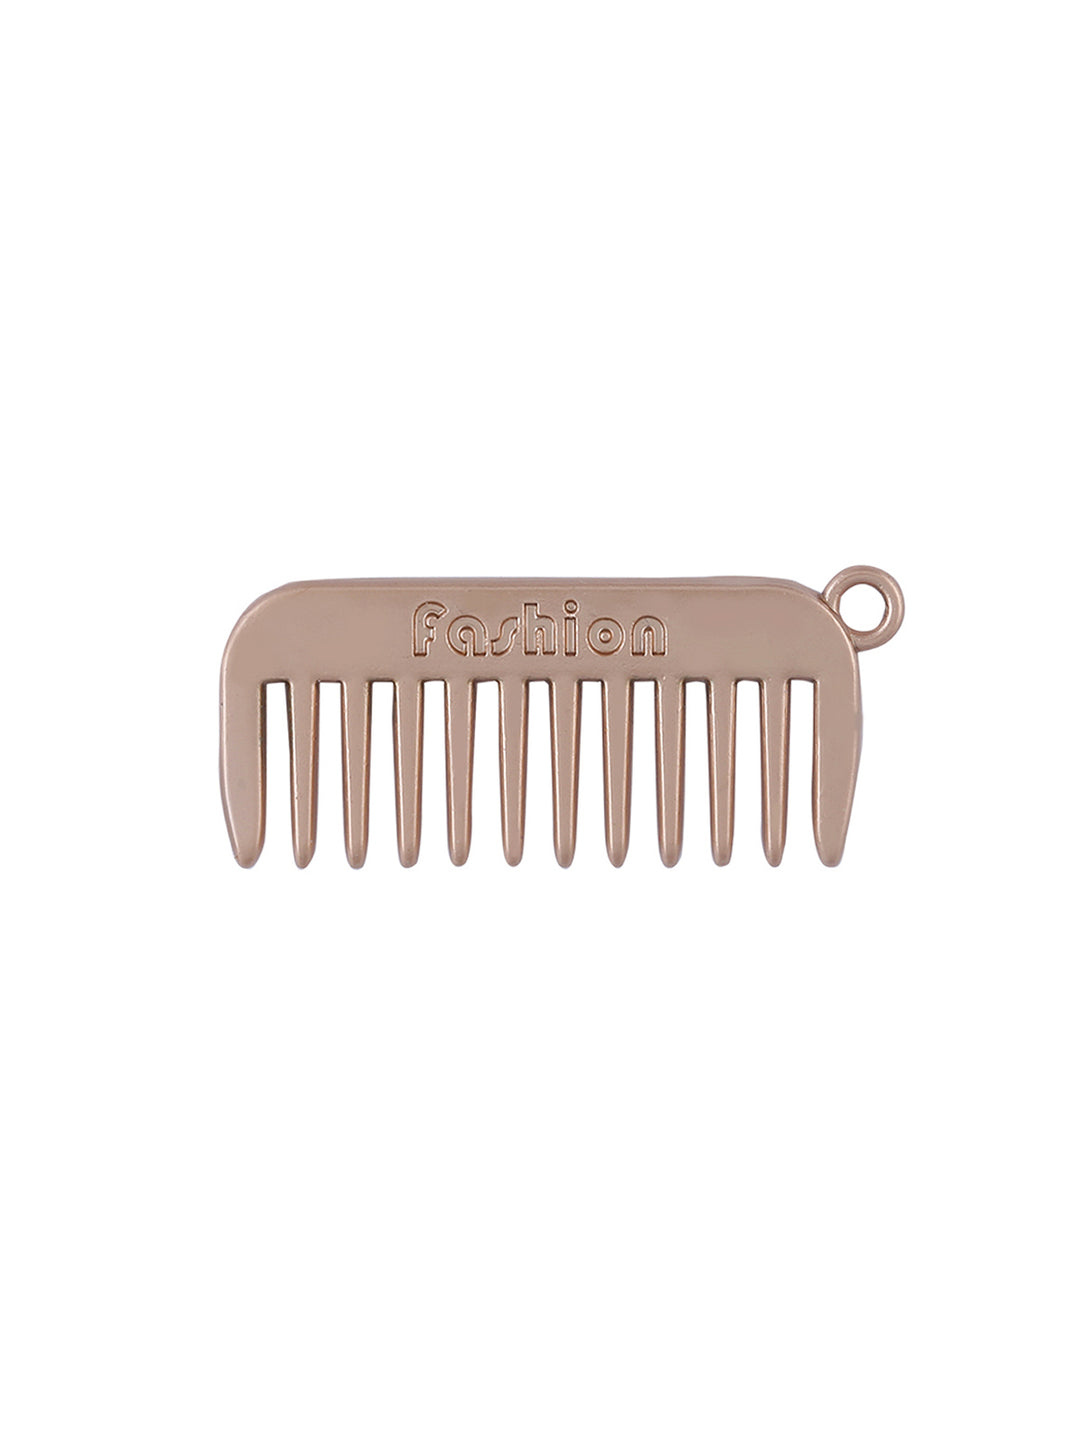 Hairdresser Comb Fashion Accessory Hardware in Matte Gold Color